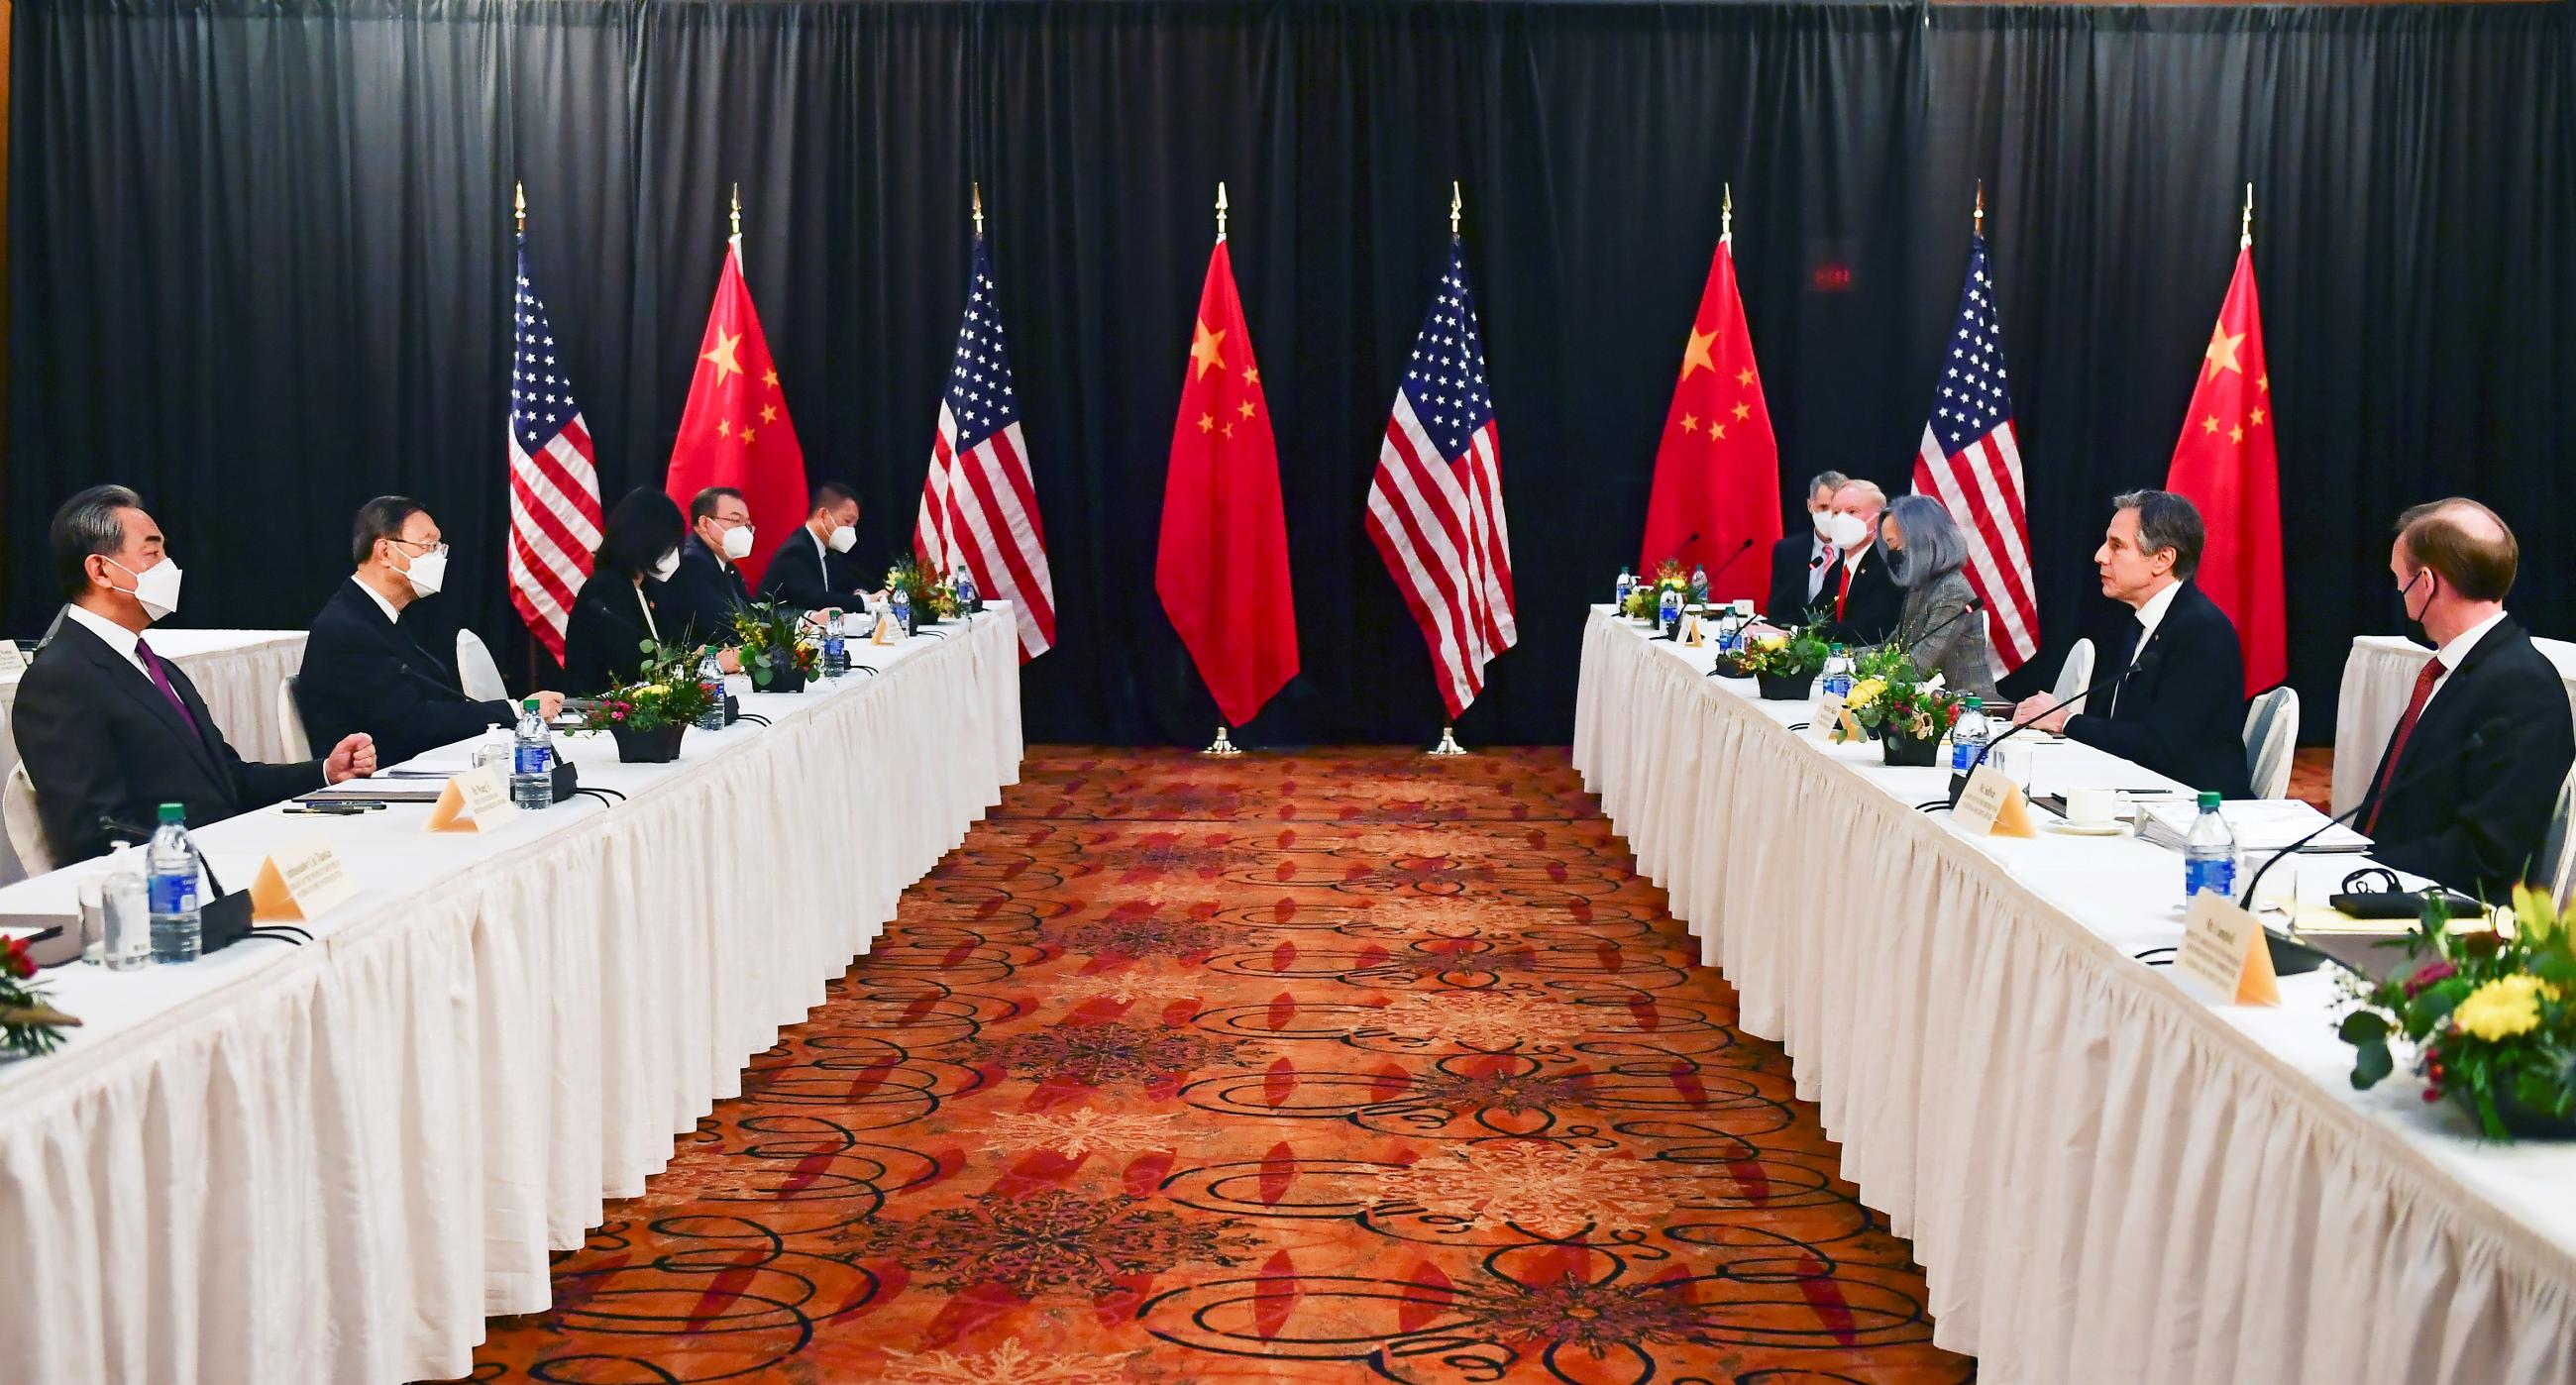 U.S. Secretary of State Antony Blinken, joined by National Security Advisor Jake Sullivan, speaks while facing Yang Jiechi, director of the Central Foreign Affairs Commission Office, and Wang Yi, China's State Councilor and Foreign Minister, at the opening session of U.S.-China talks at the Captain Cook Hotel in Anchorage, Alaska, U.S. March 18, 2021